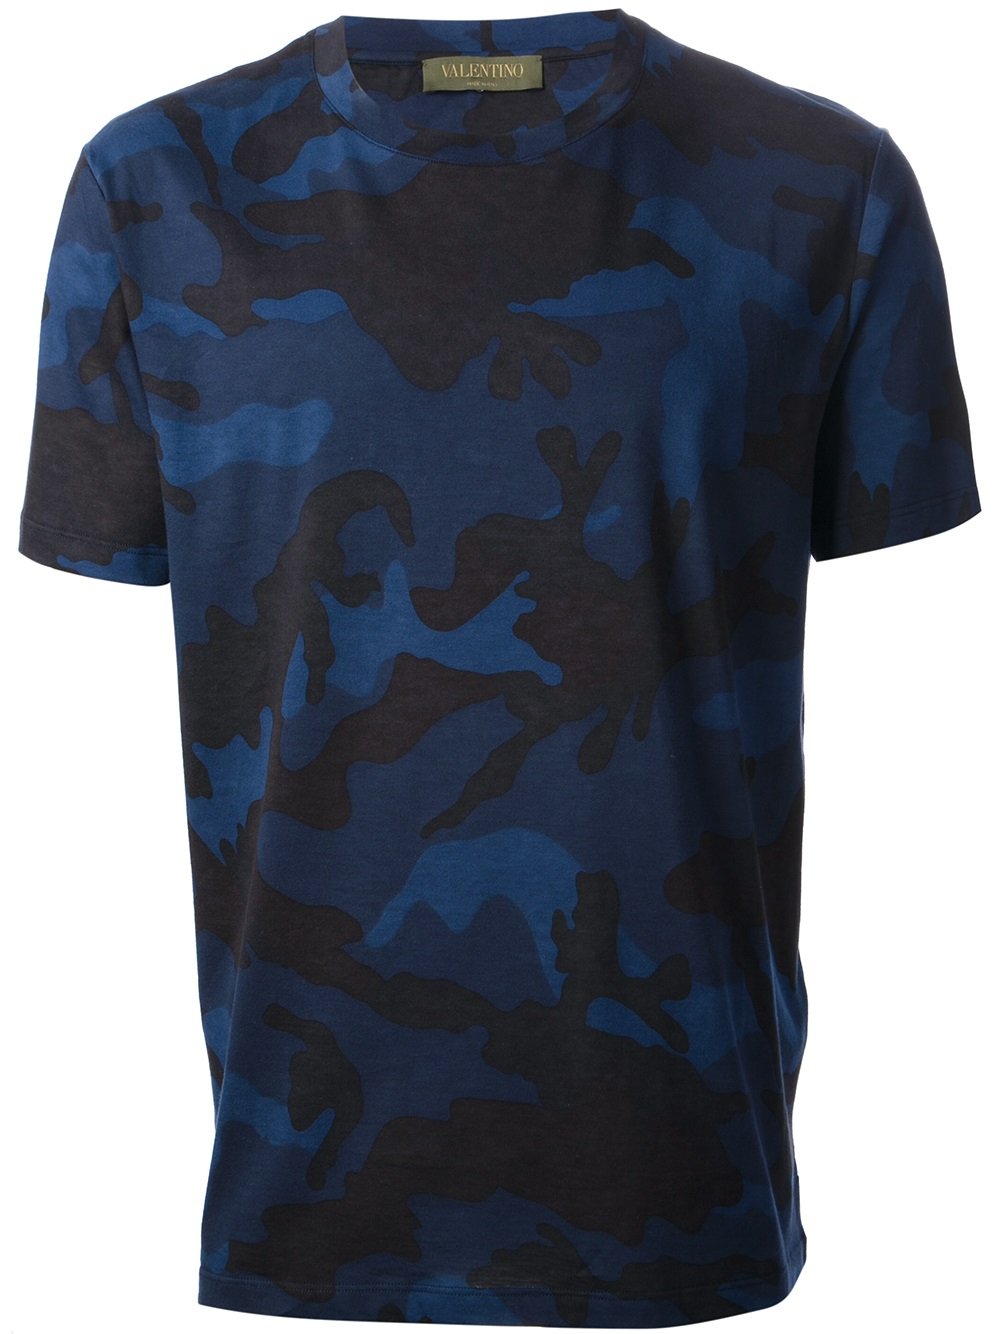 Lyst - Valentino Camouflage T-shirt in Blue for Men